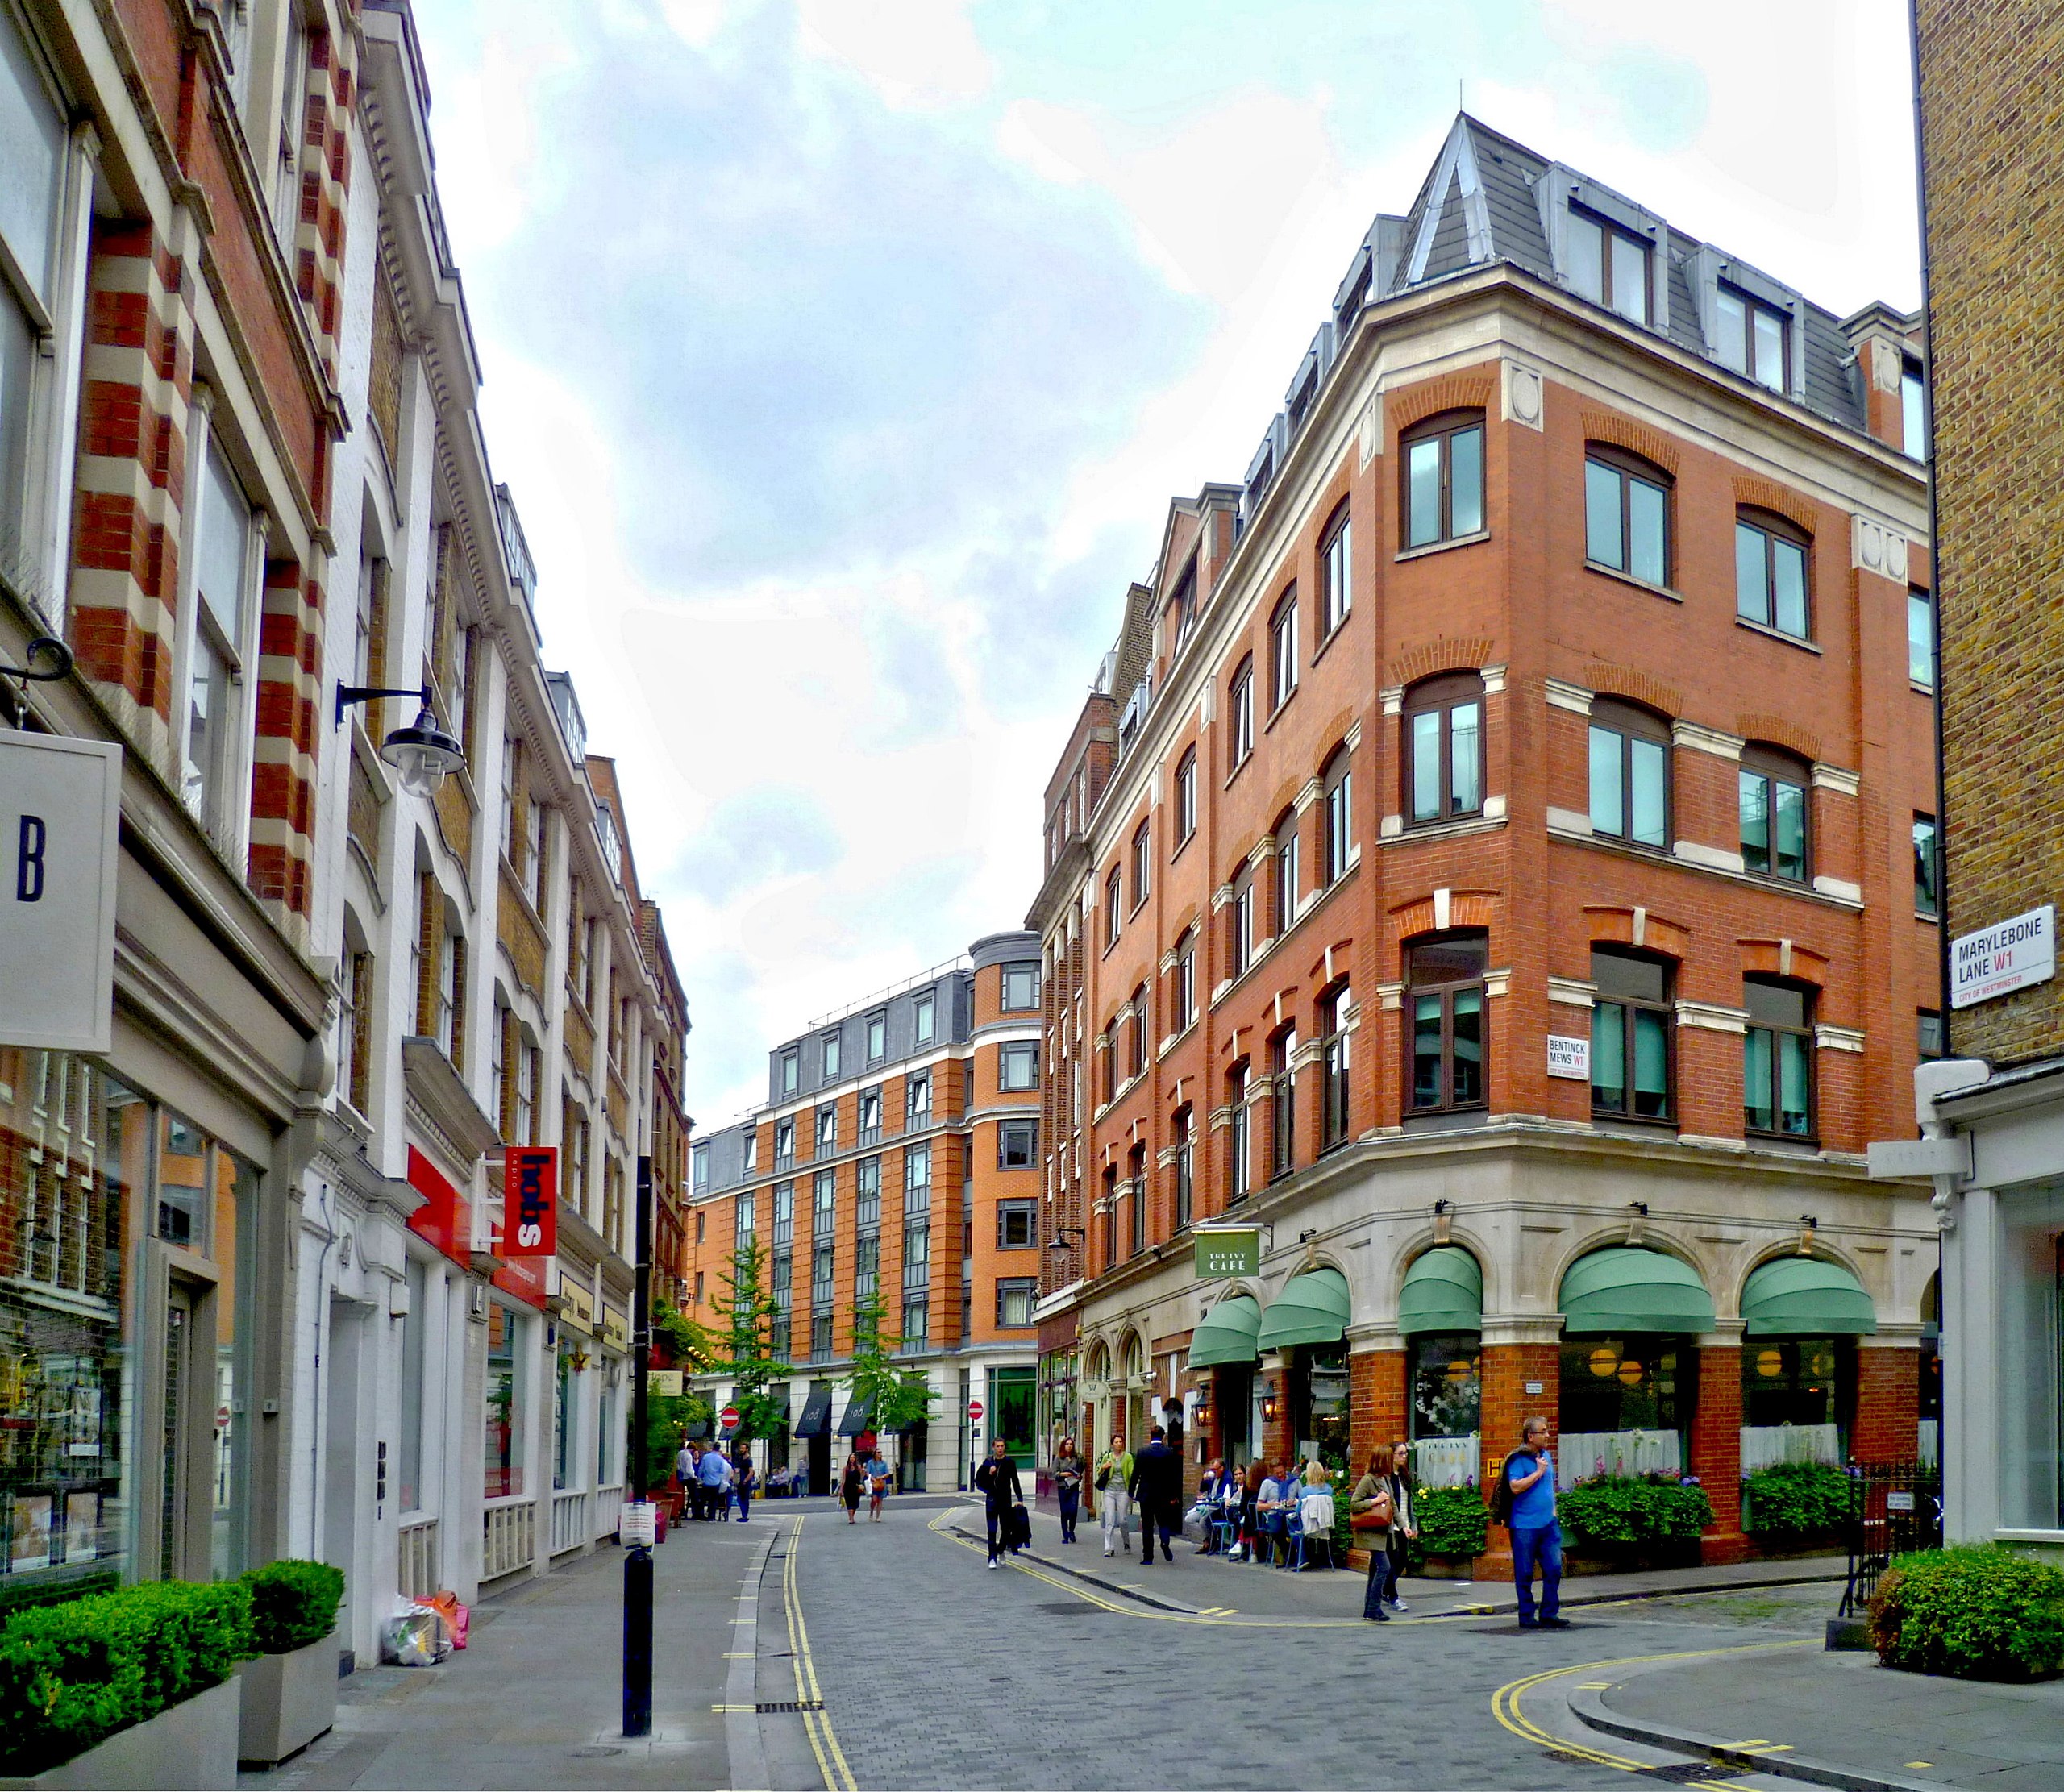 Explore the charming and sophisticated neighbourhood of Marylebone with our guide to the top things to do. From designer boutiques and artisanal markets to stunning Georgian architecture and world-class museums, this post covers all the must-see attractions in this elegant part of London. Whether you're a history buff, a foodie, or a fashionista, you'll find plenty of inspiration for your visit to #Marylebone. | Fun Thing To Do In London | #Londontravelguide | London Itinerary | Places To Visit 